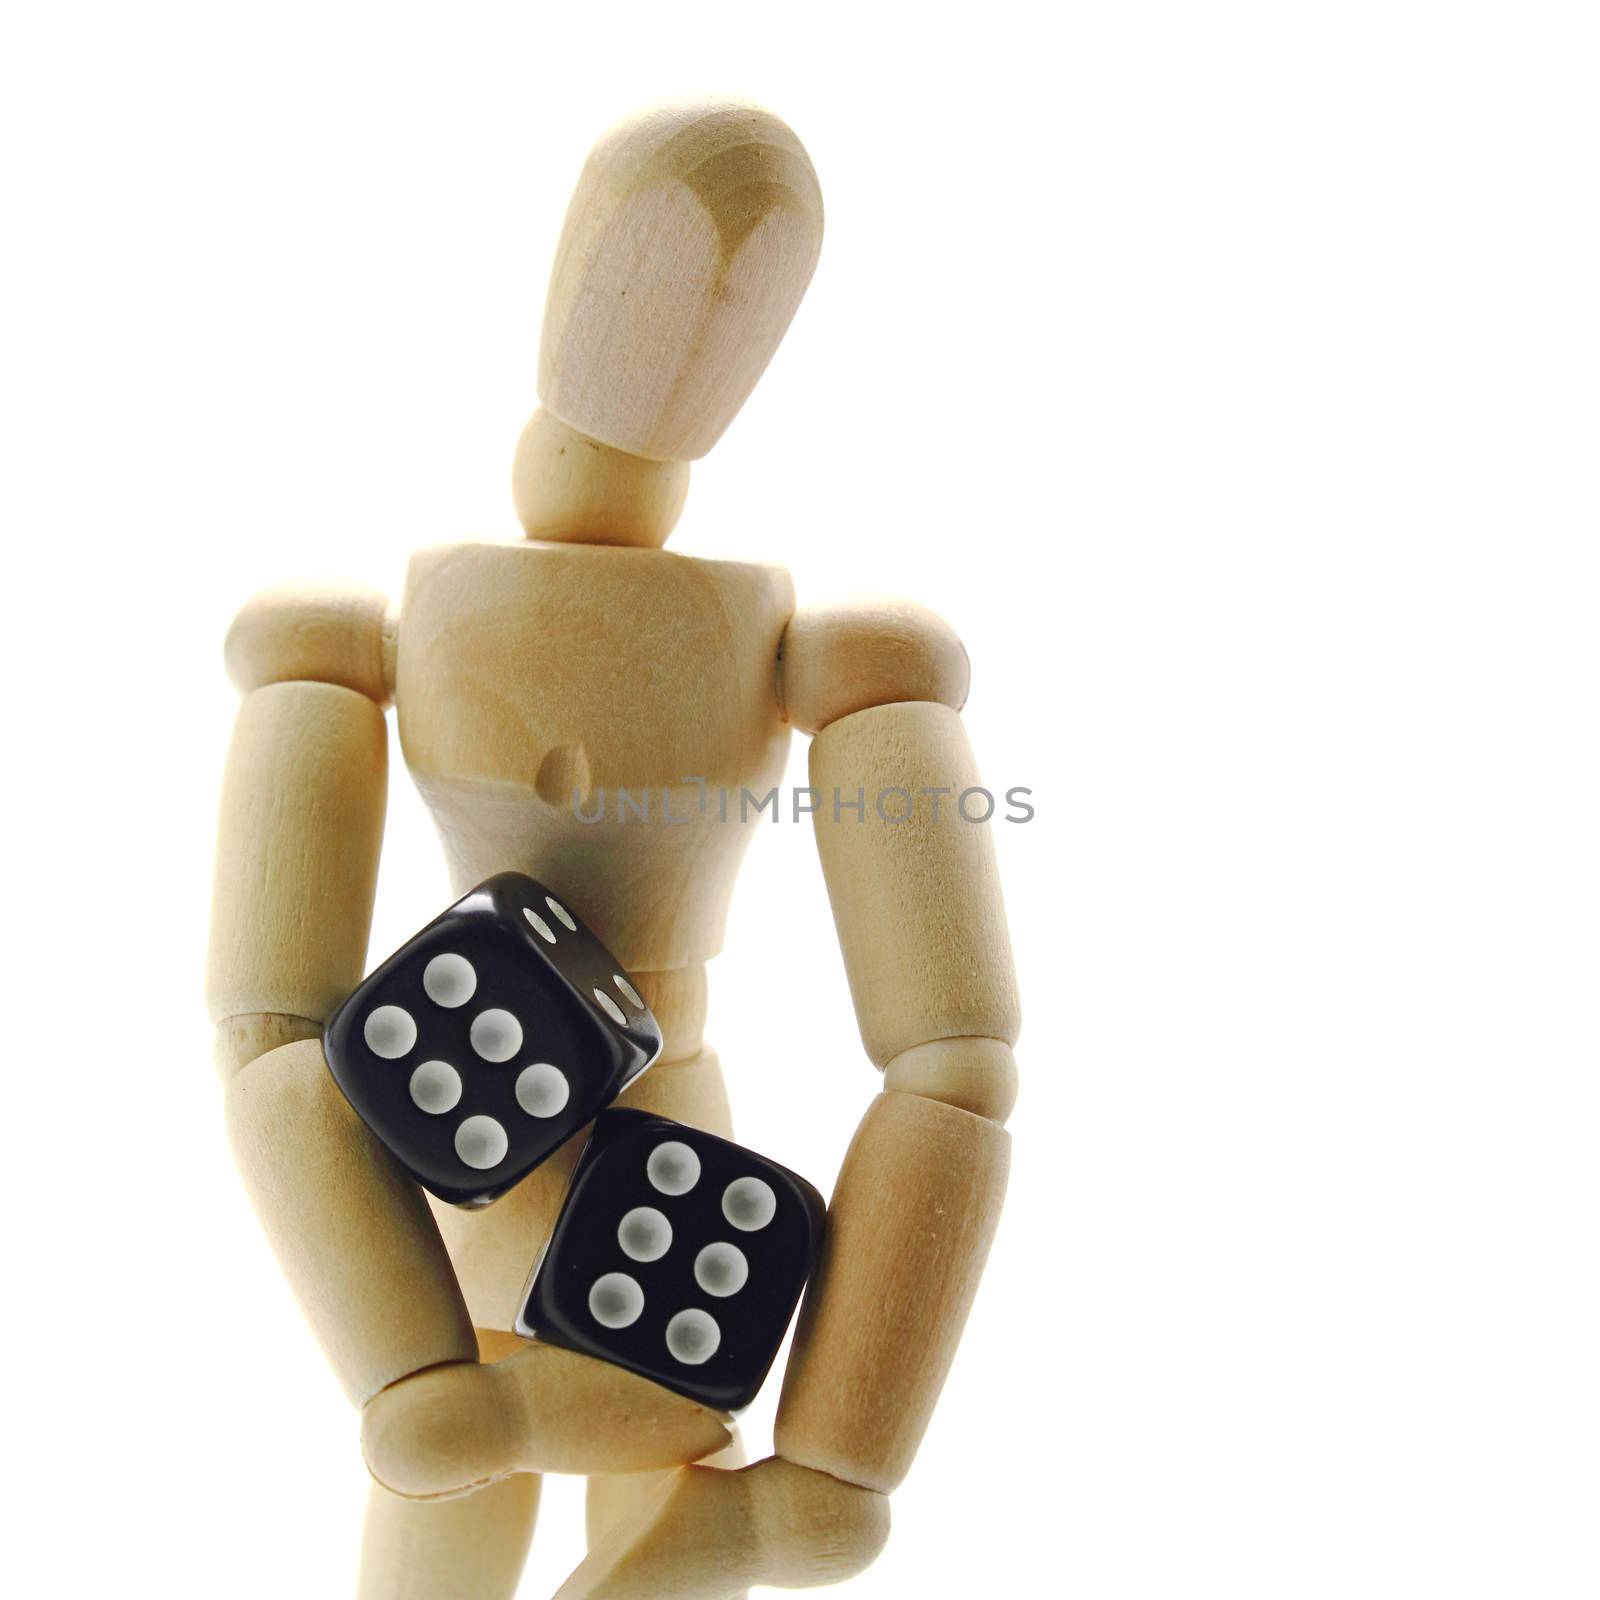 Hold the dice by dynamicfoto